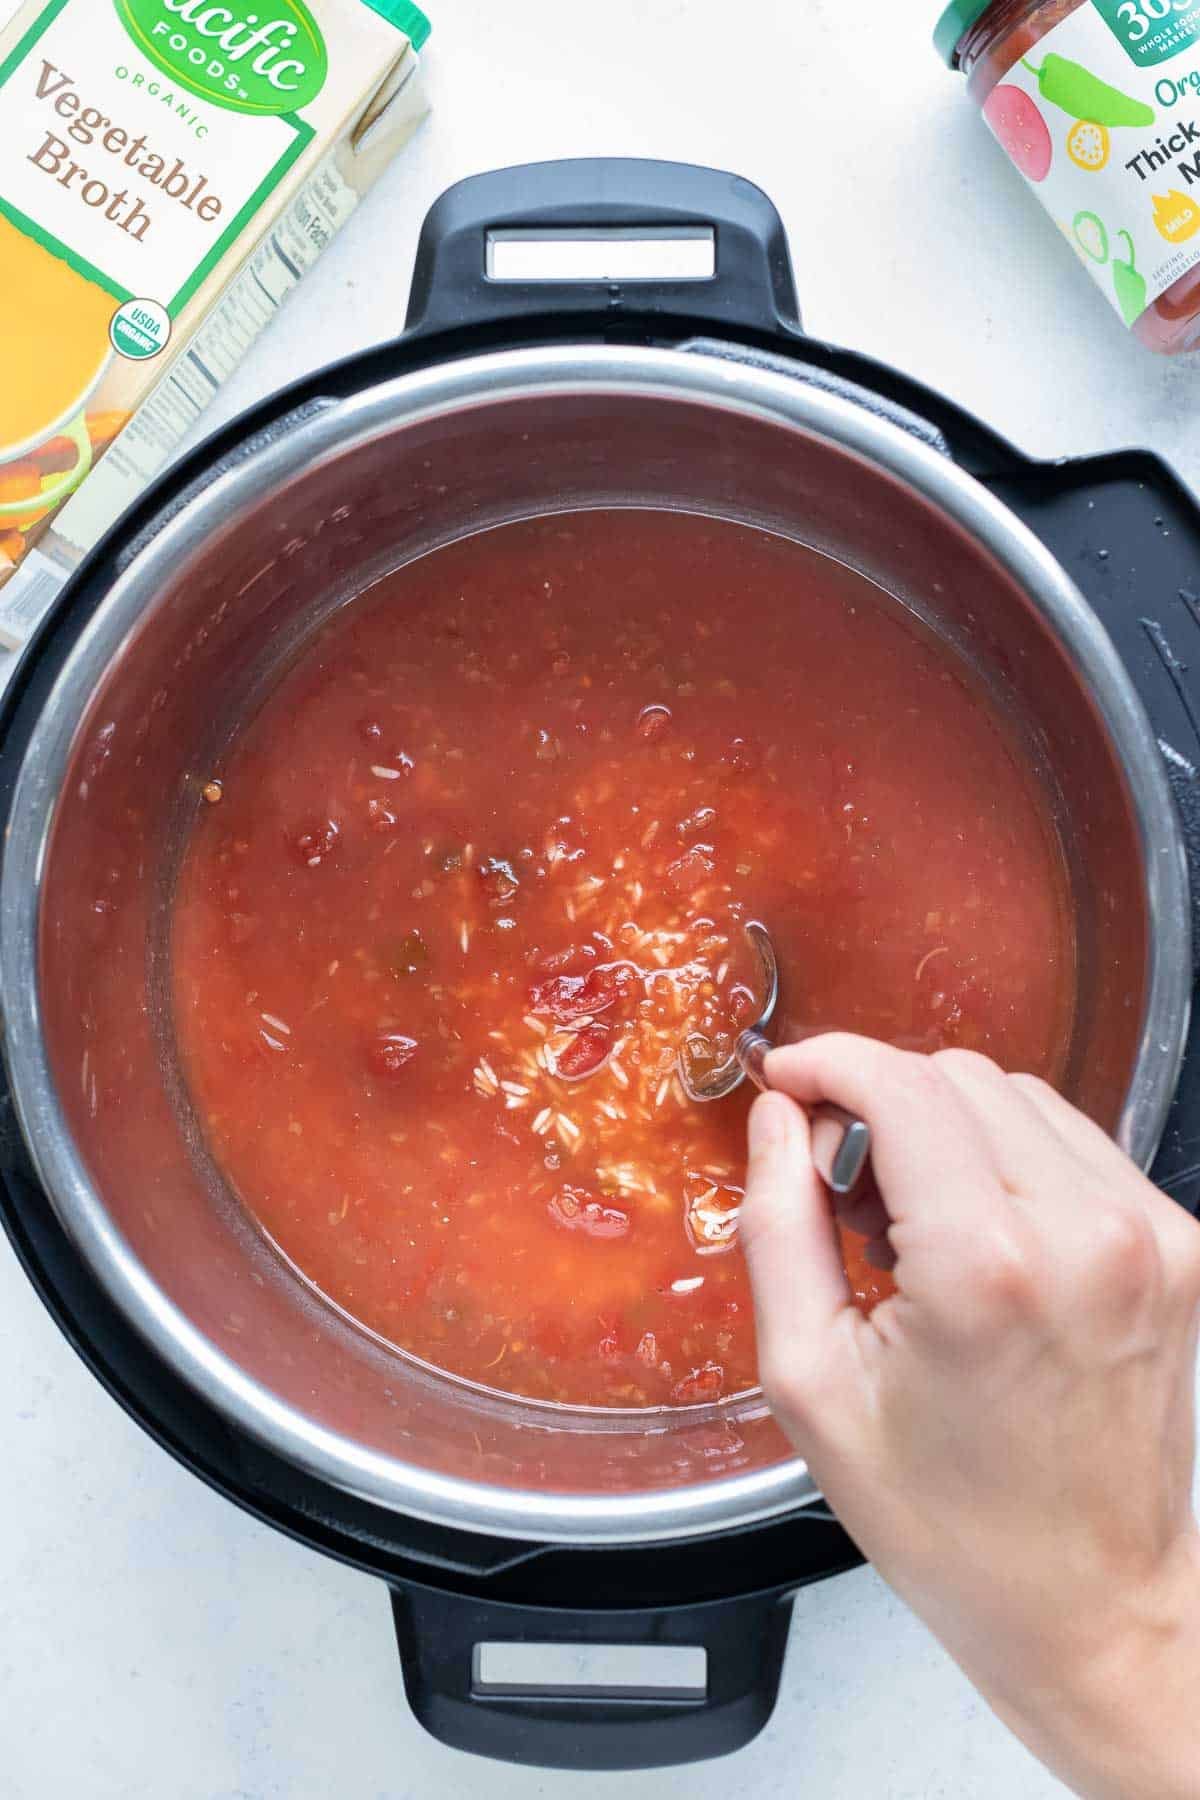 Rice, vegetable broth, and tomato paste are combined in a pressure cooker.